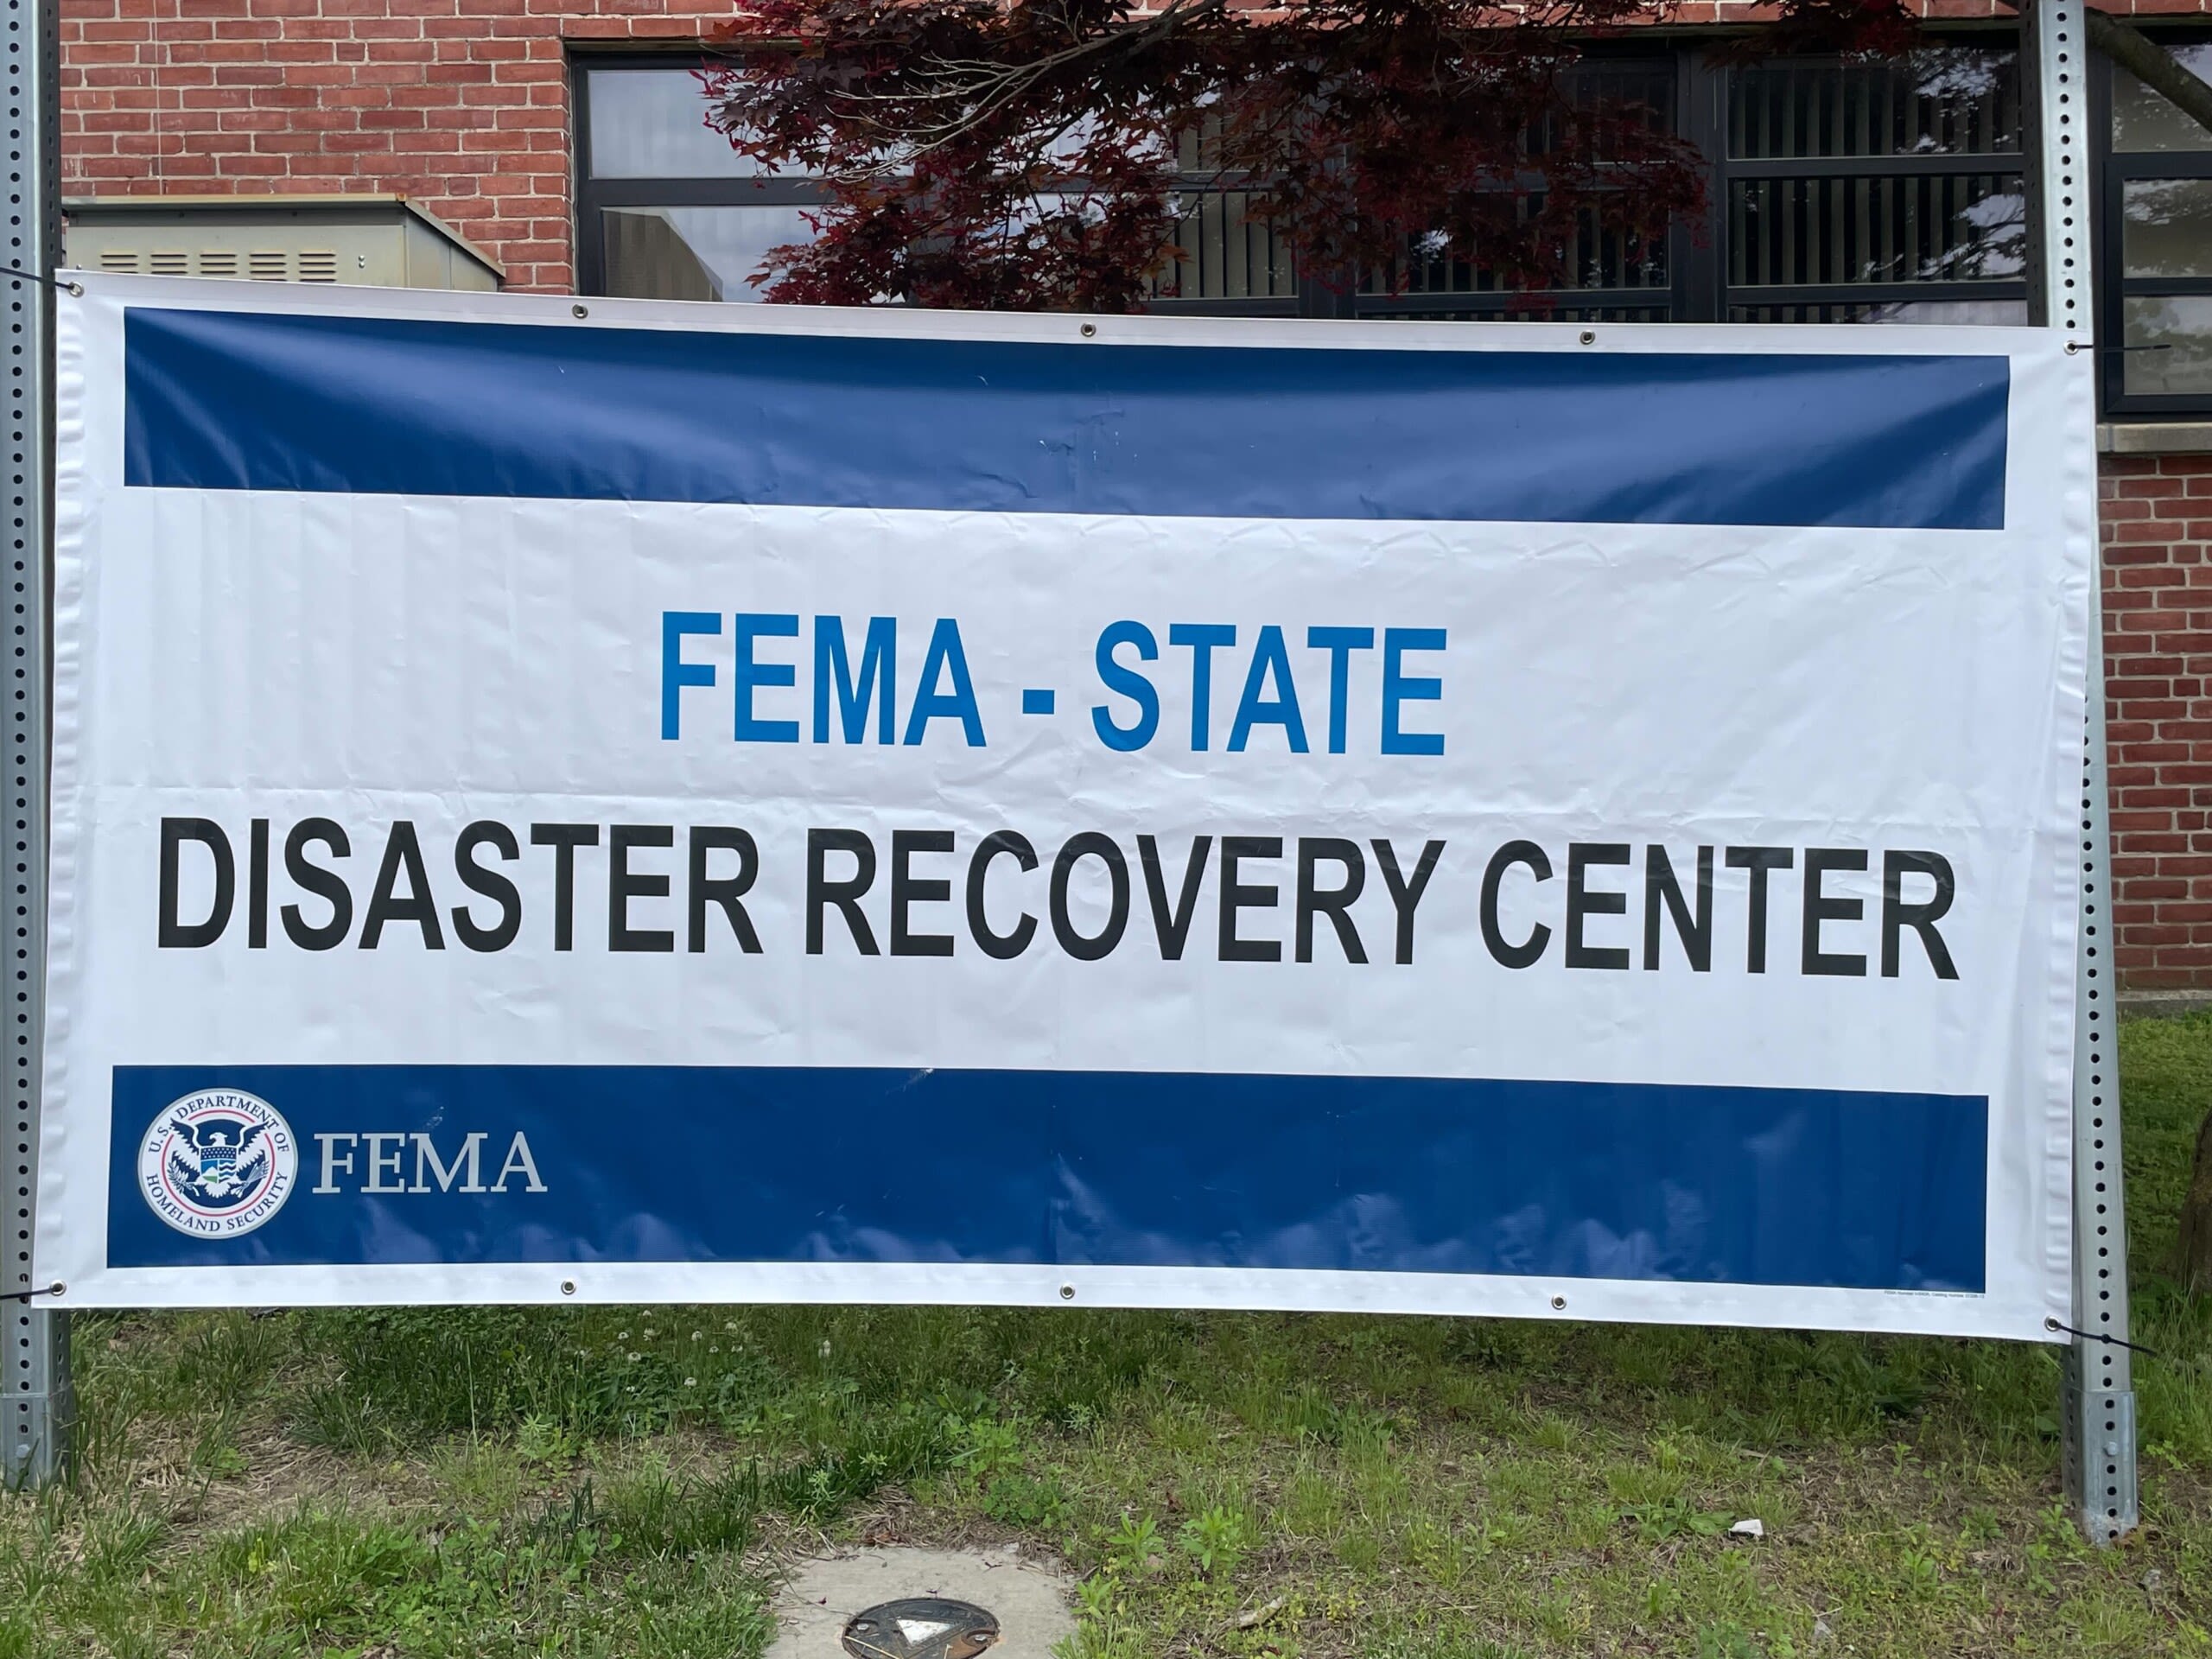 FEMA sets up Disaster Recovery Center in Attleboro after September storms | ABC6